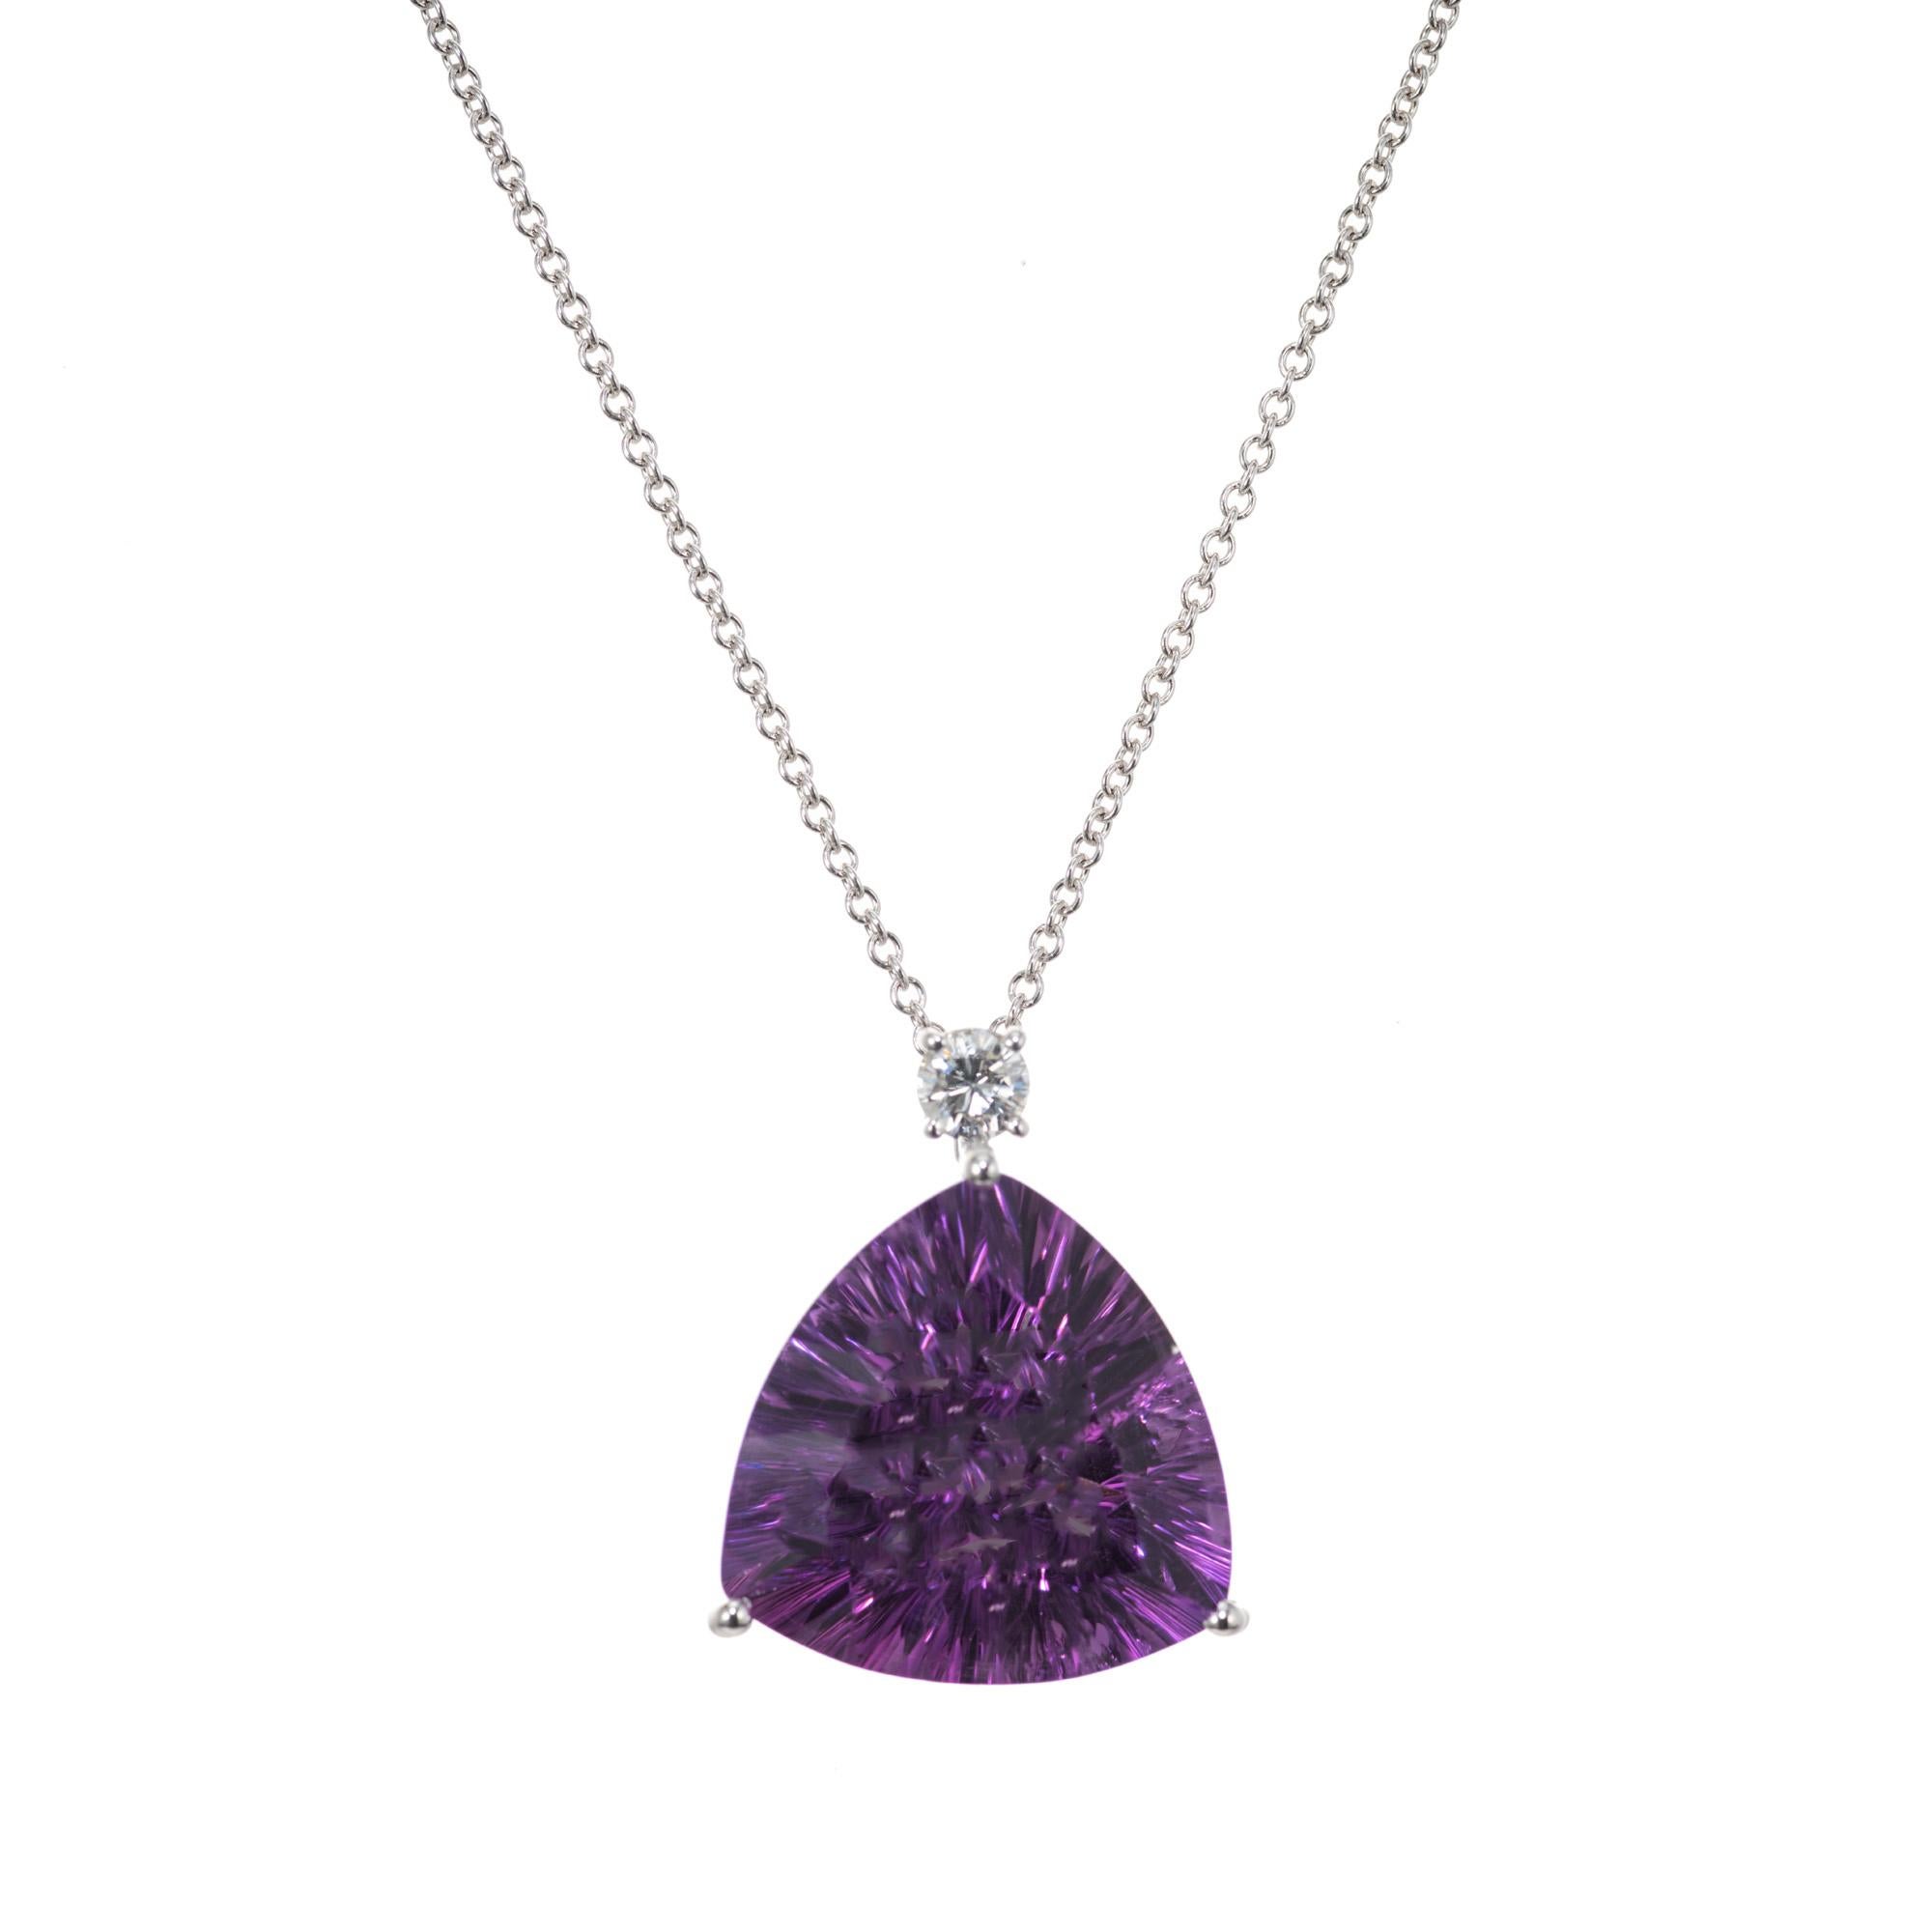 Rich purple amethyst and diamond pendant necklace. This spectacular fantasy cut triangular 13.04 carat amethyst is set in a simple three prong hand made 14k white gold setting, accented with one round brilliant cut diamond. 16 inch 14k white gold